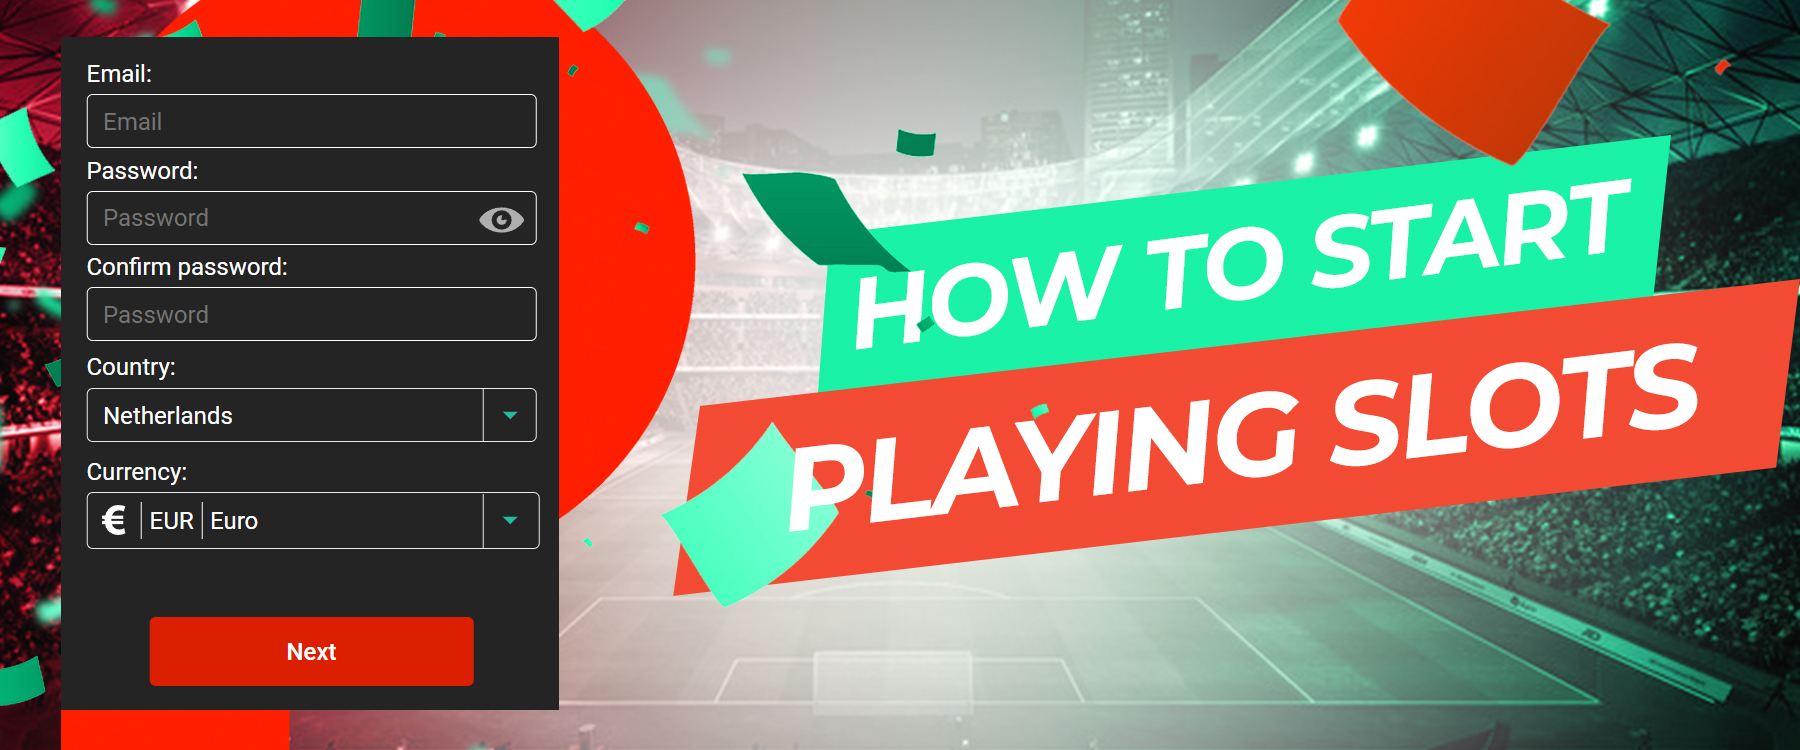 How to start playing slots on the online casino Pin-Up